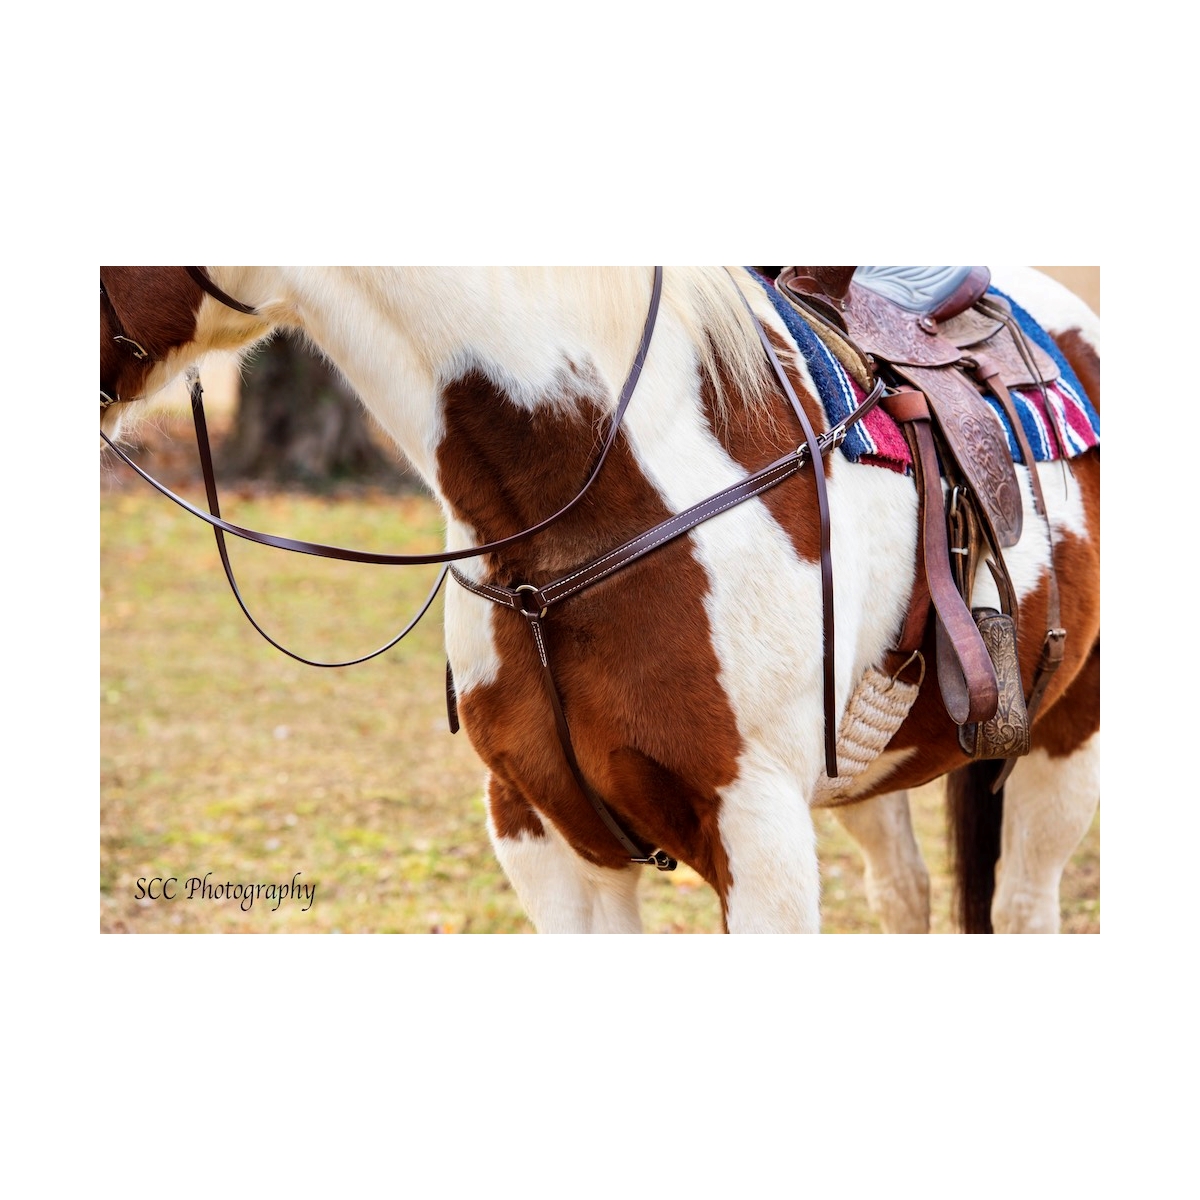 Order Orange Halter Bridle with Bit Hangers Only at Two Horse Tack